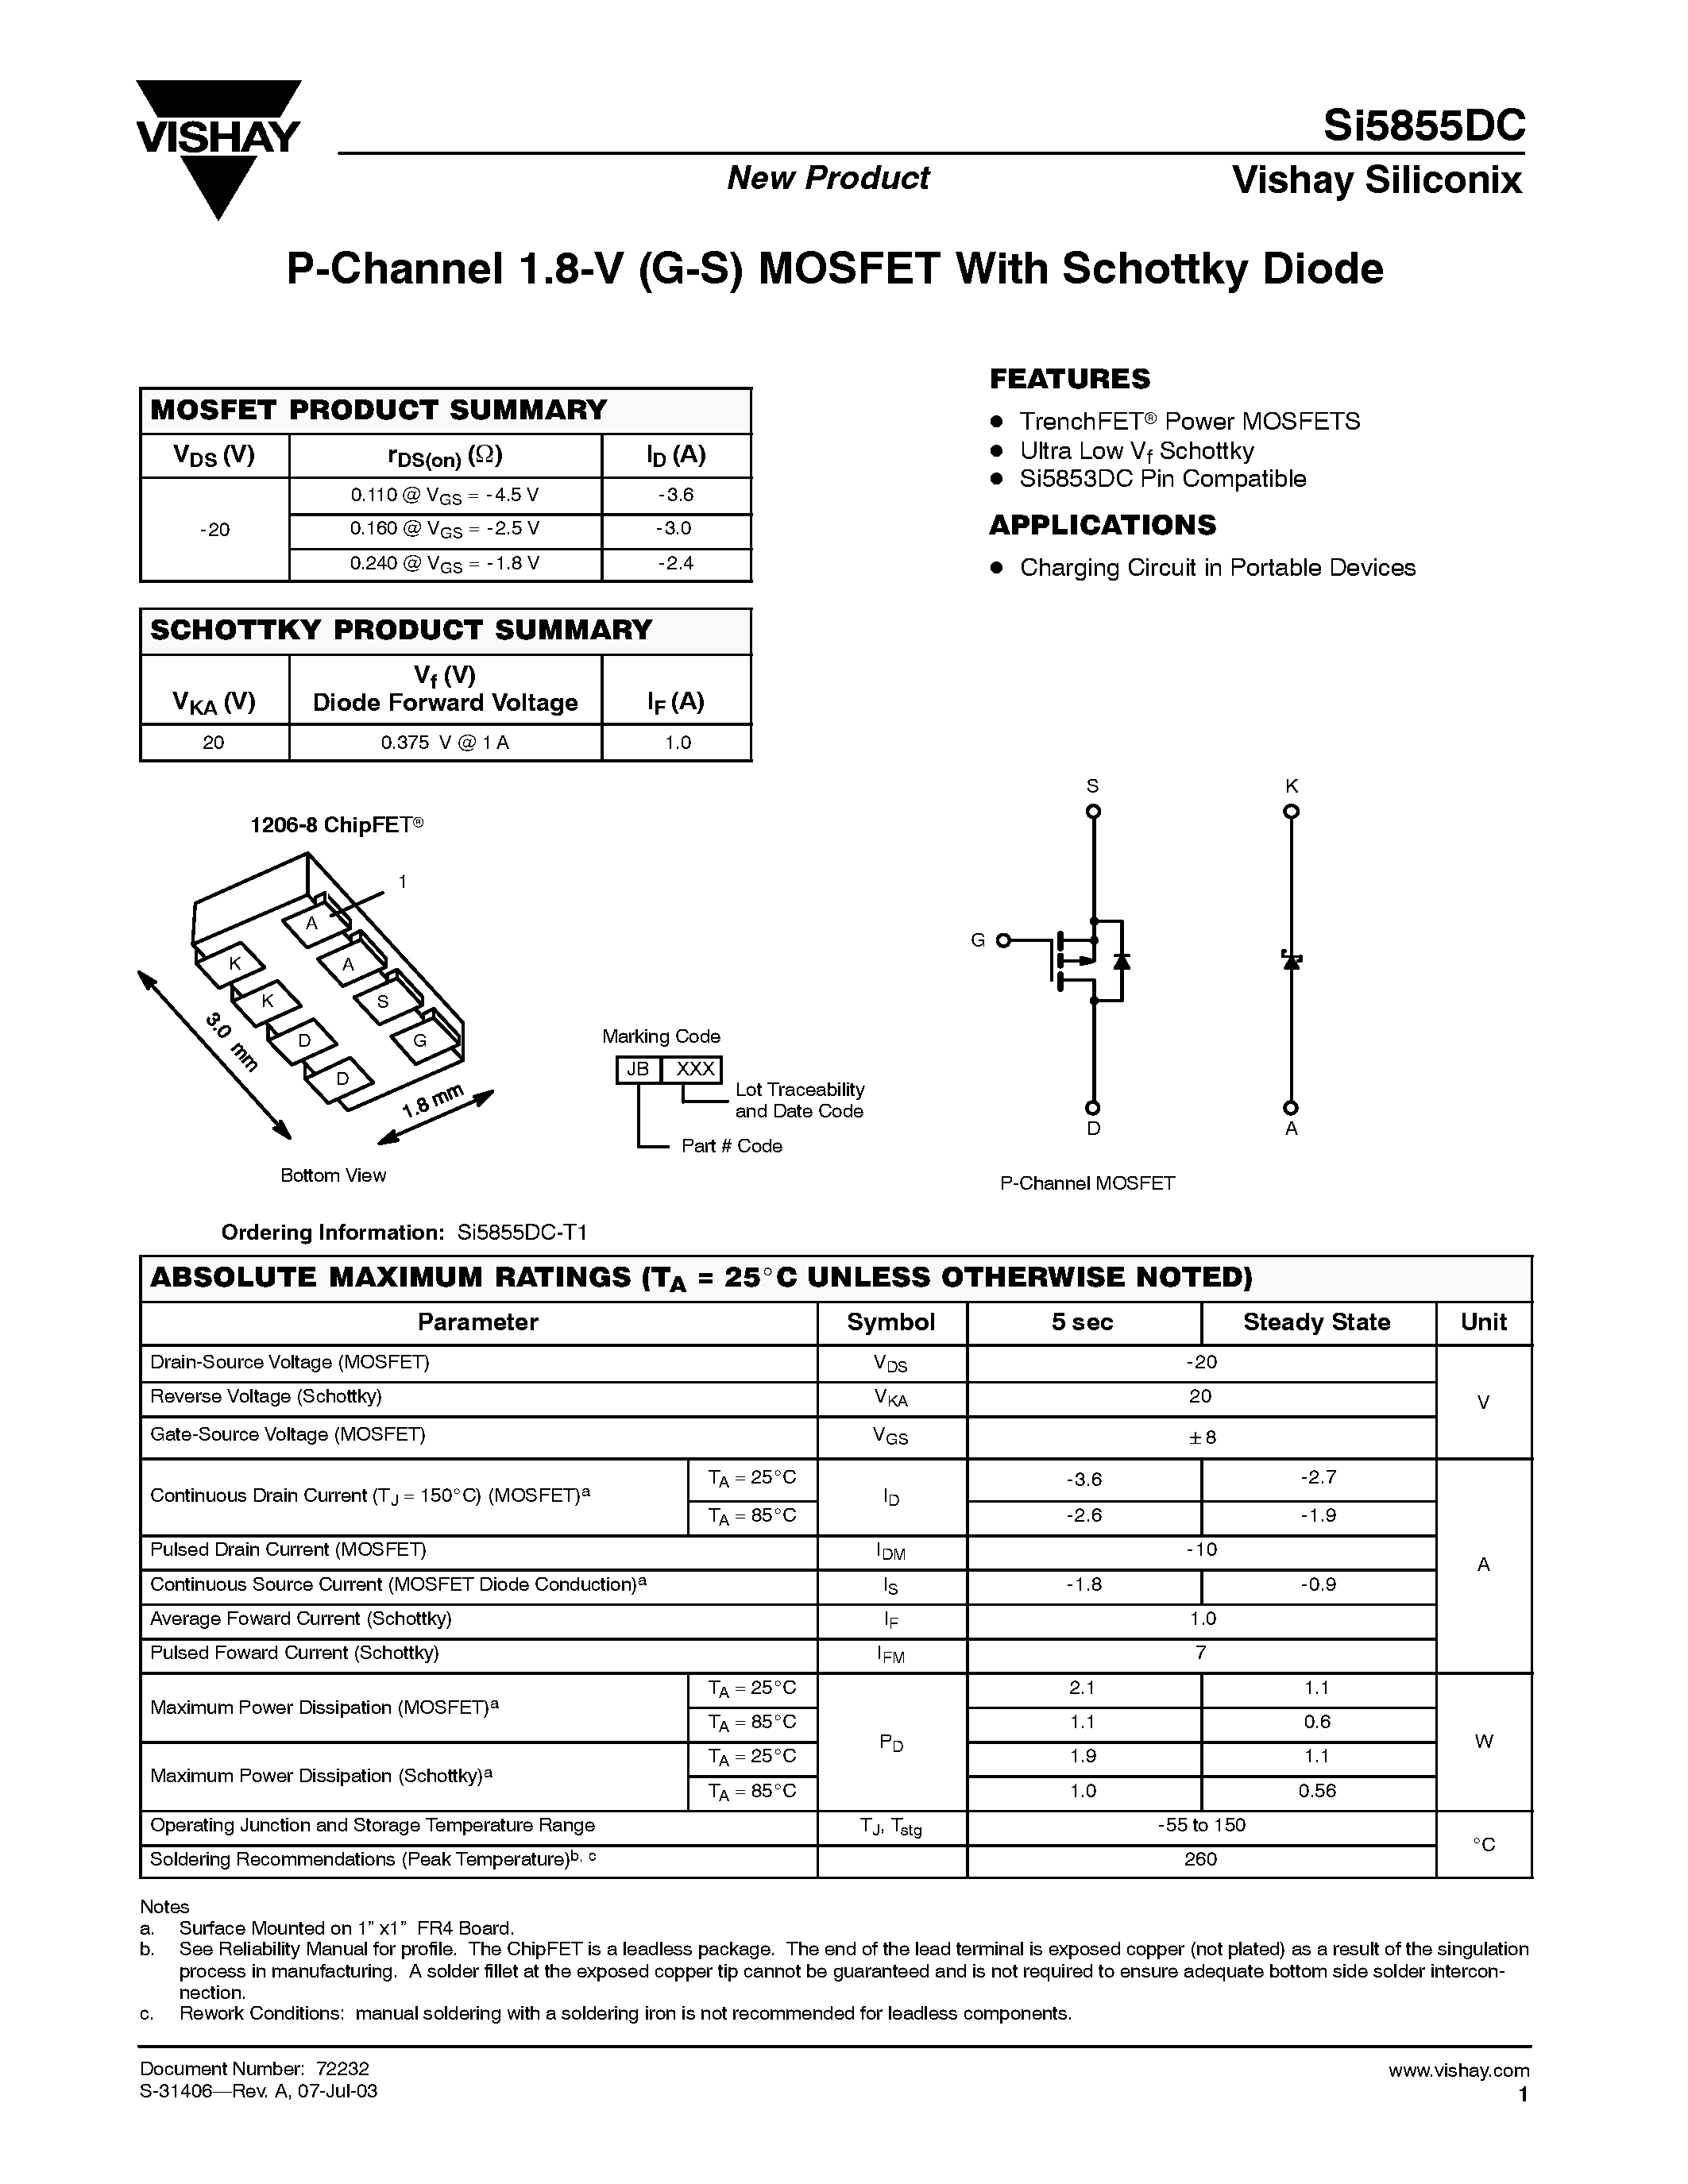 Datasheet SI5855DC-T1 - P-Channel 1.8-V (G-S) MOSFET With Schottky Diode page 1